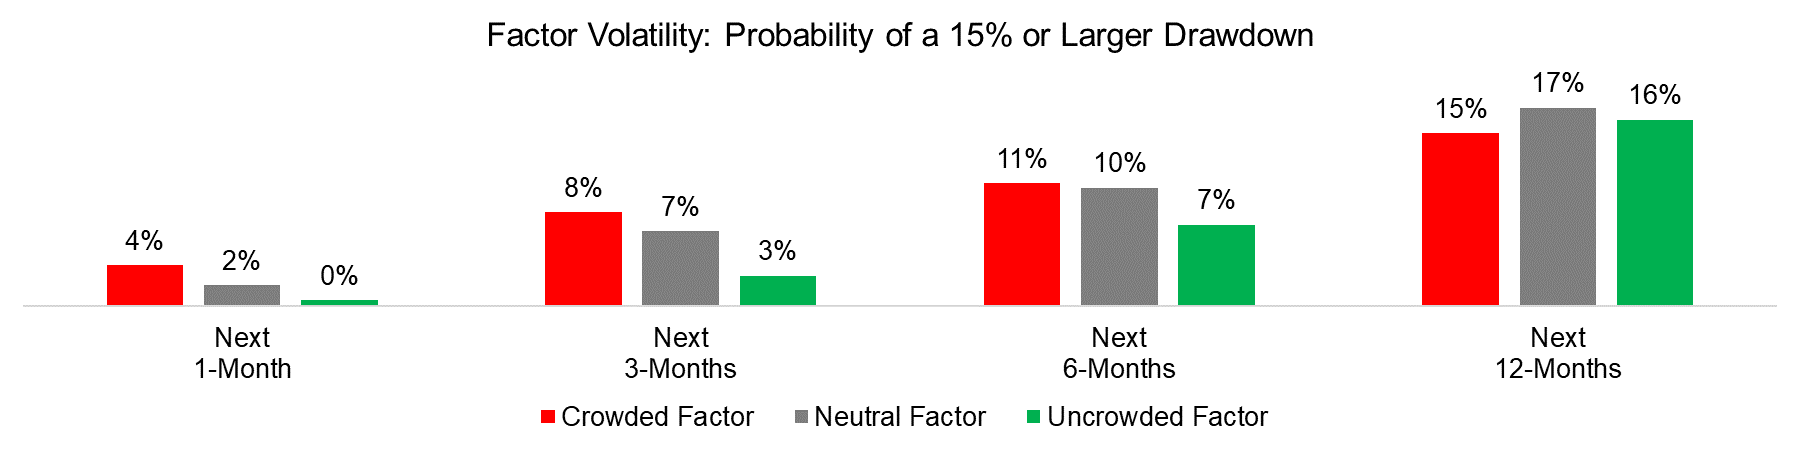 Factor Volatility Probability of a 15% or Larger Drawdown